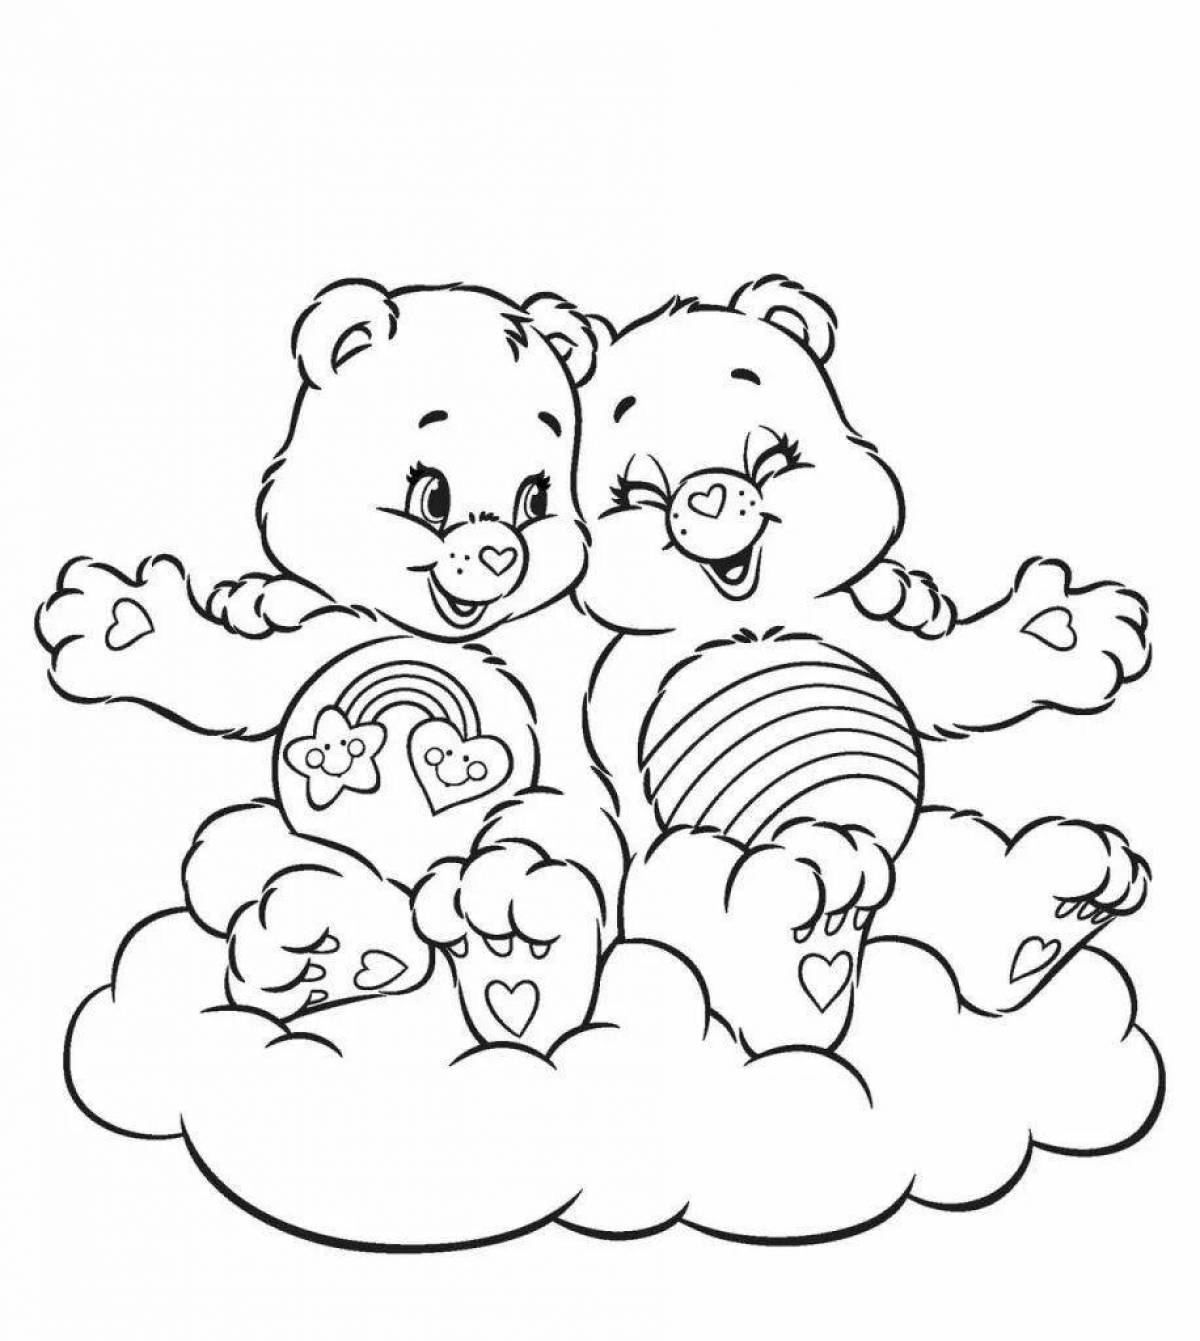 Adorable Care Bears Coloring Page